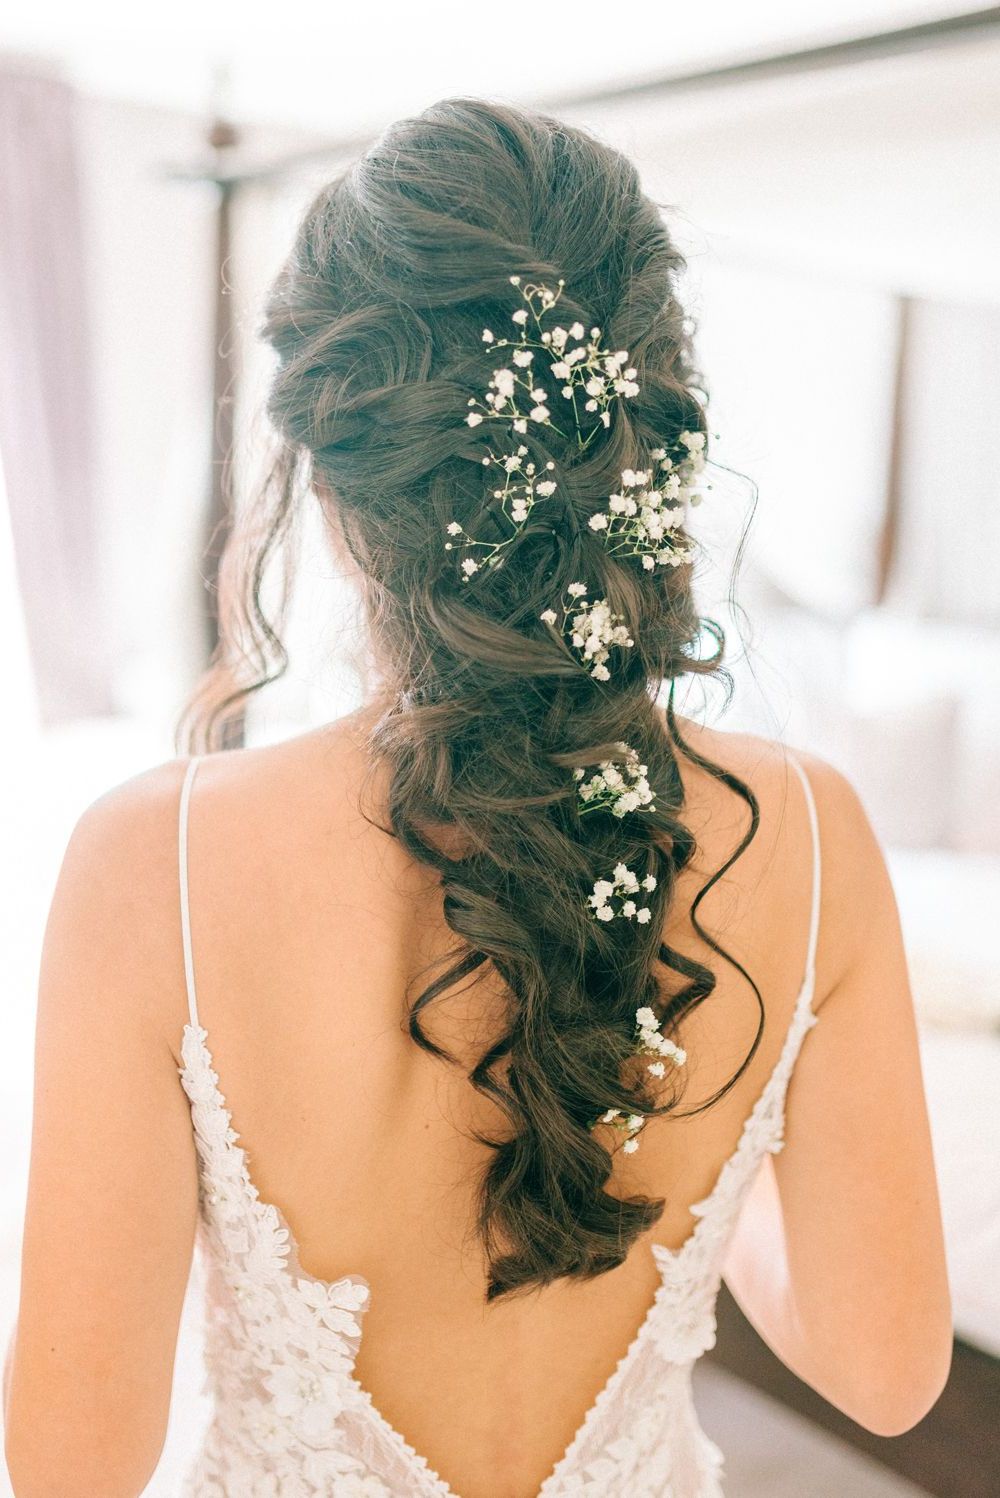 Godwick Hall Wedding With Bride In Anna Georgina For Latest Pinned Back Tousled Waves Bridal Hairstyles (View 18 of 20)